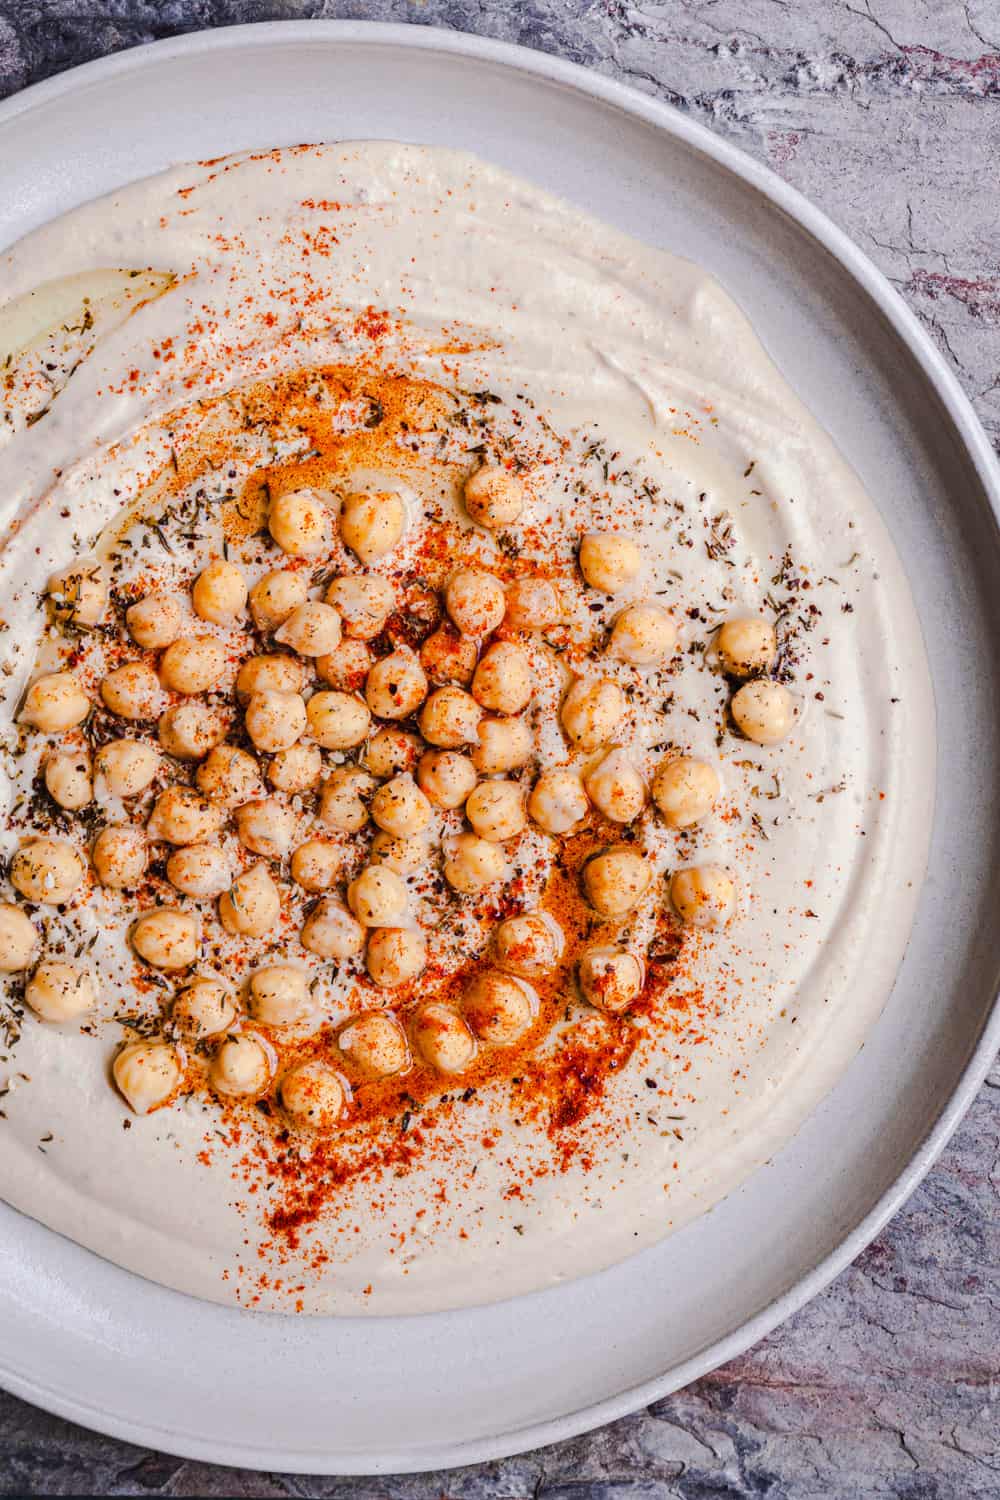 smooth and creamy hummus on a plate topped with chickpeas, spices and olive oil, overhead shot